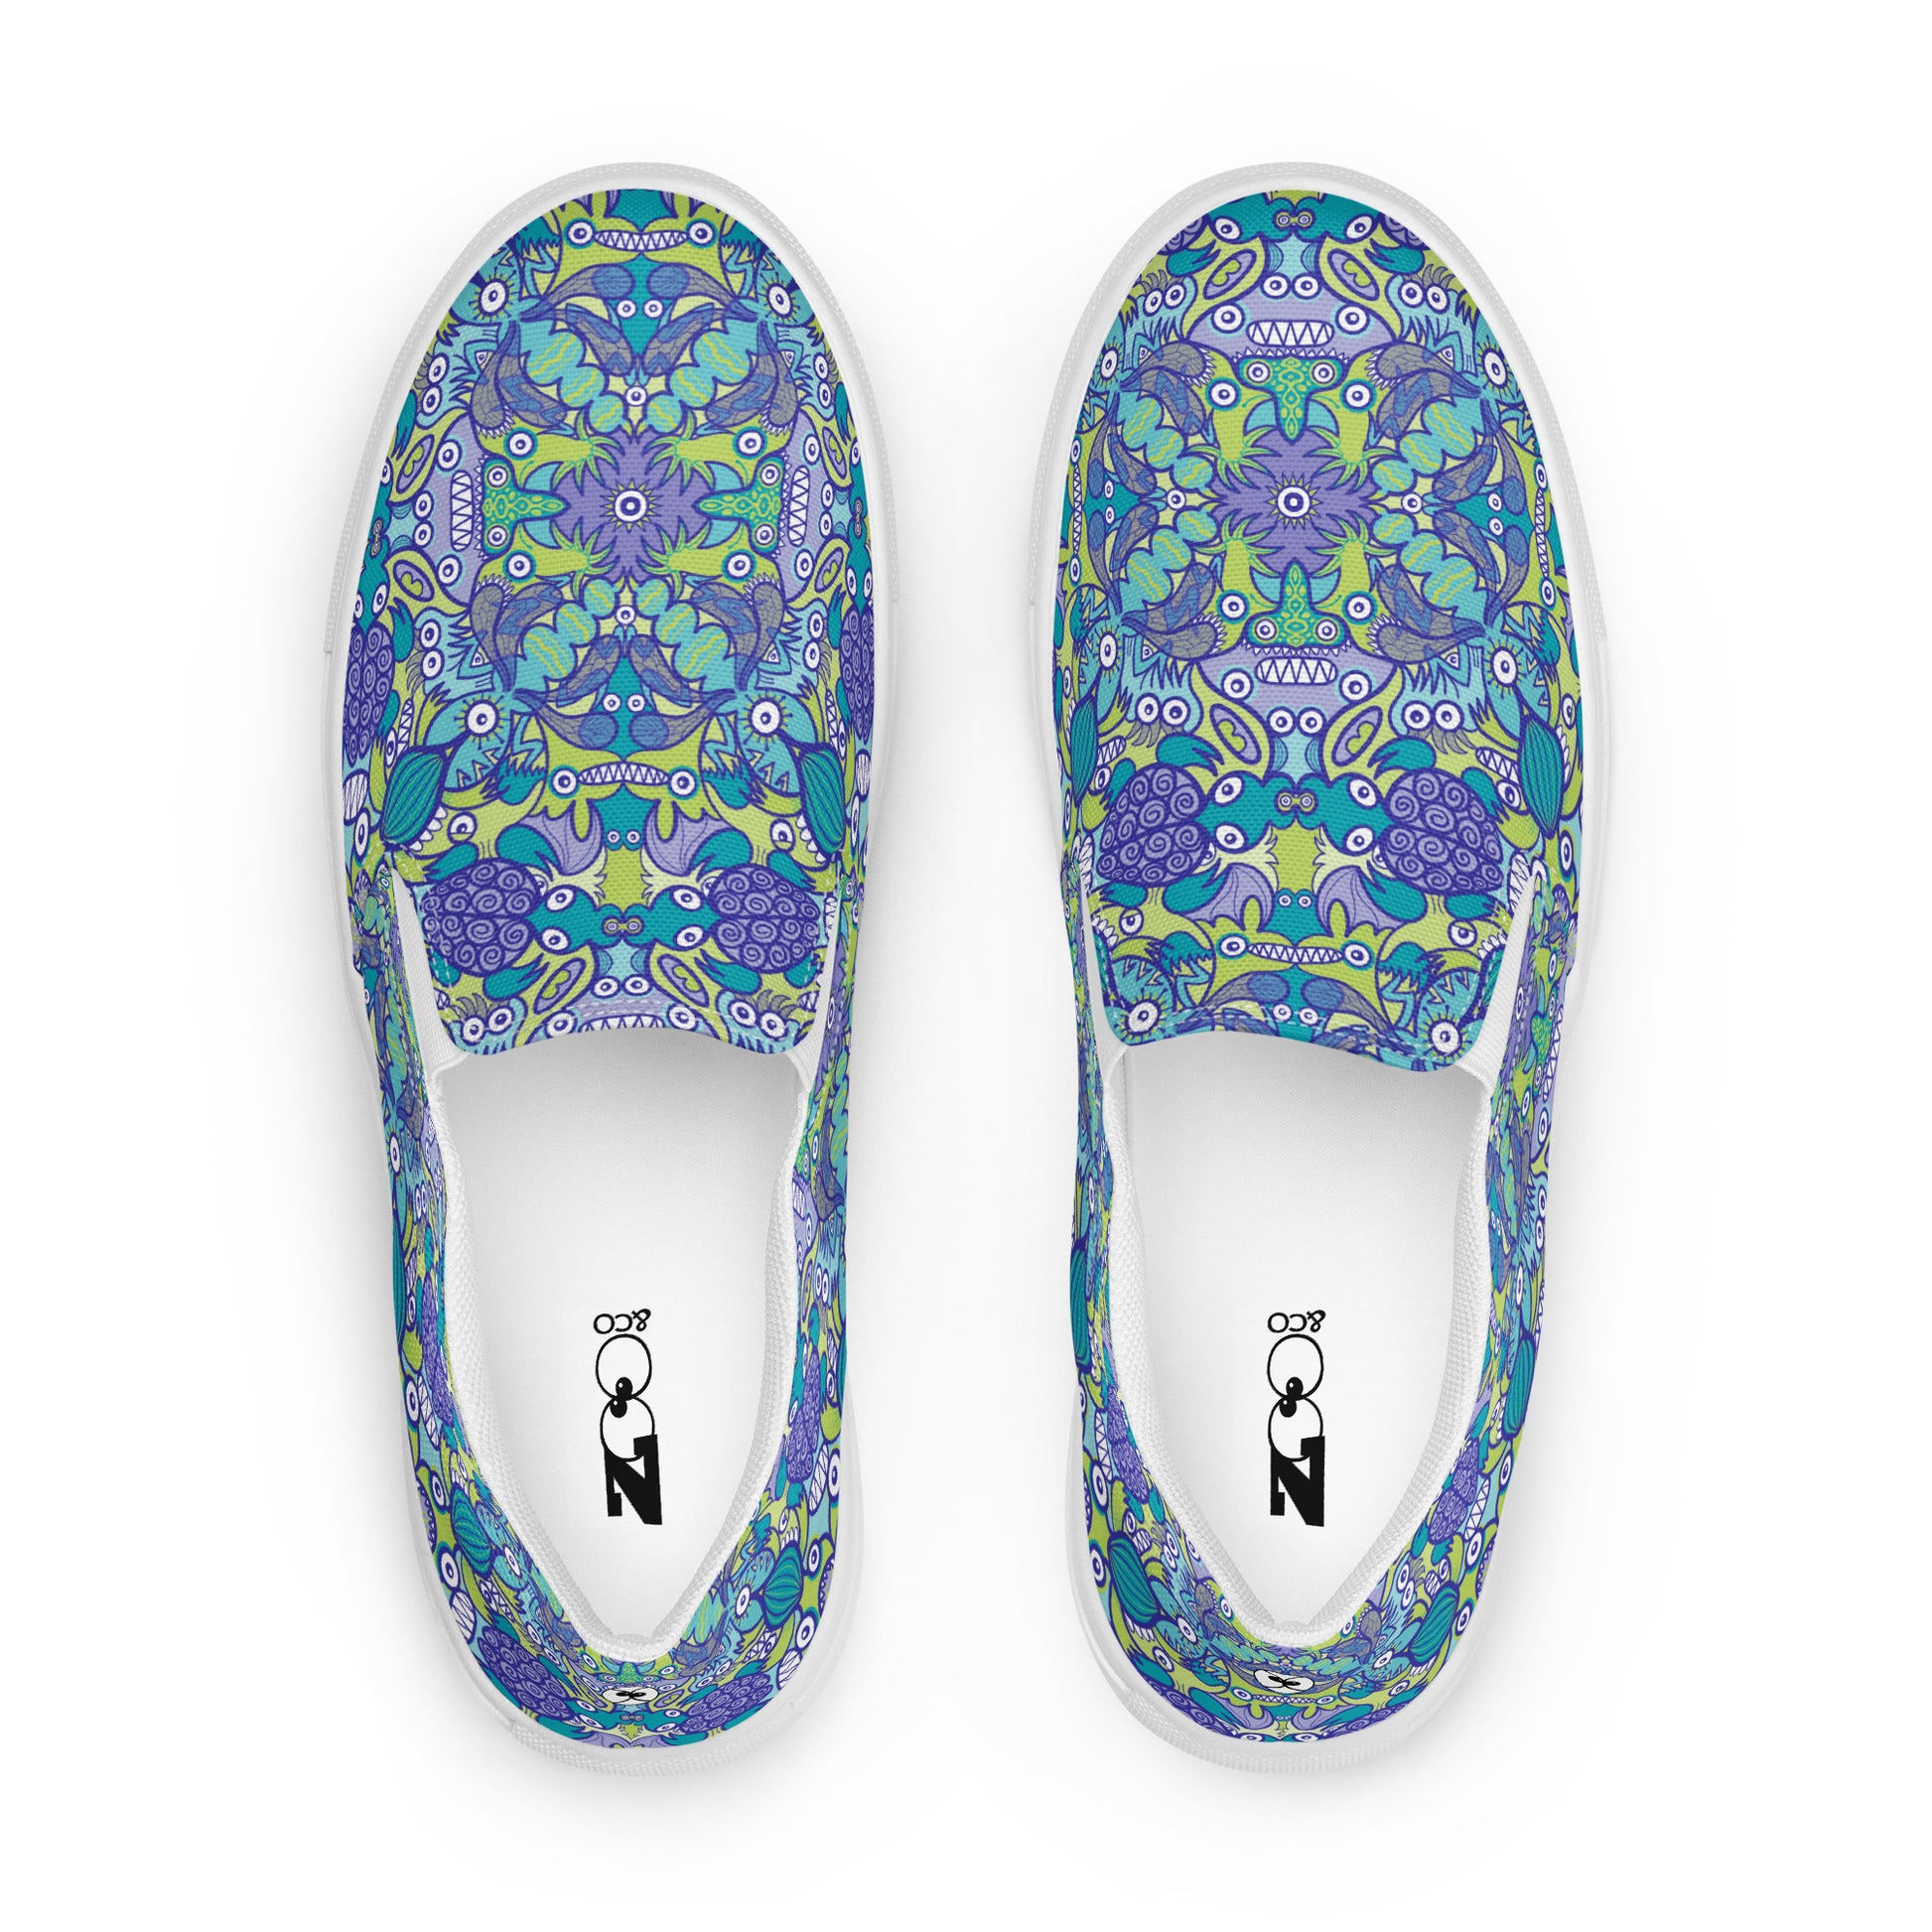 Once upon a time in an ocean full of life Women’s slip-on canvas shoes. Top view